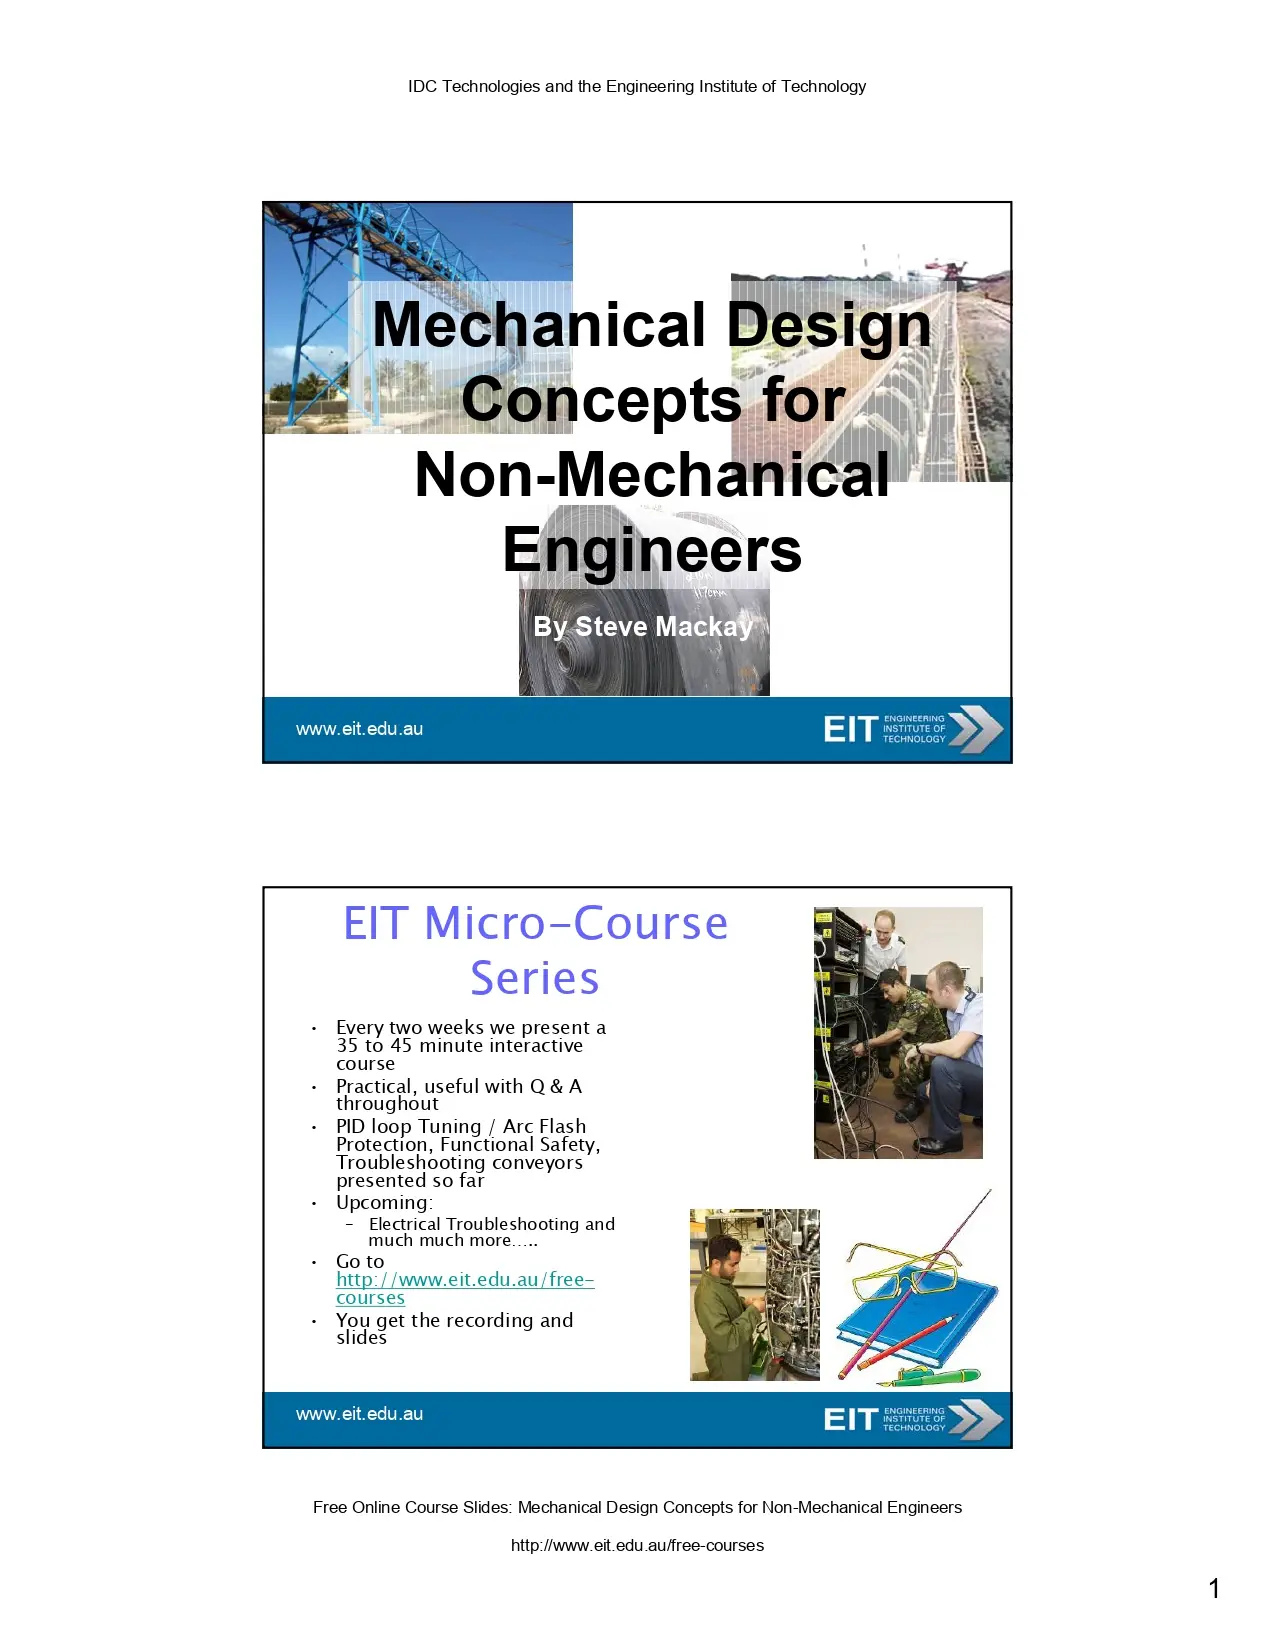 Mechanical Design Concepts For Non-Mechanical Engineers